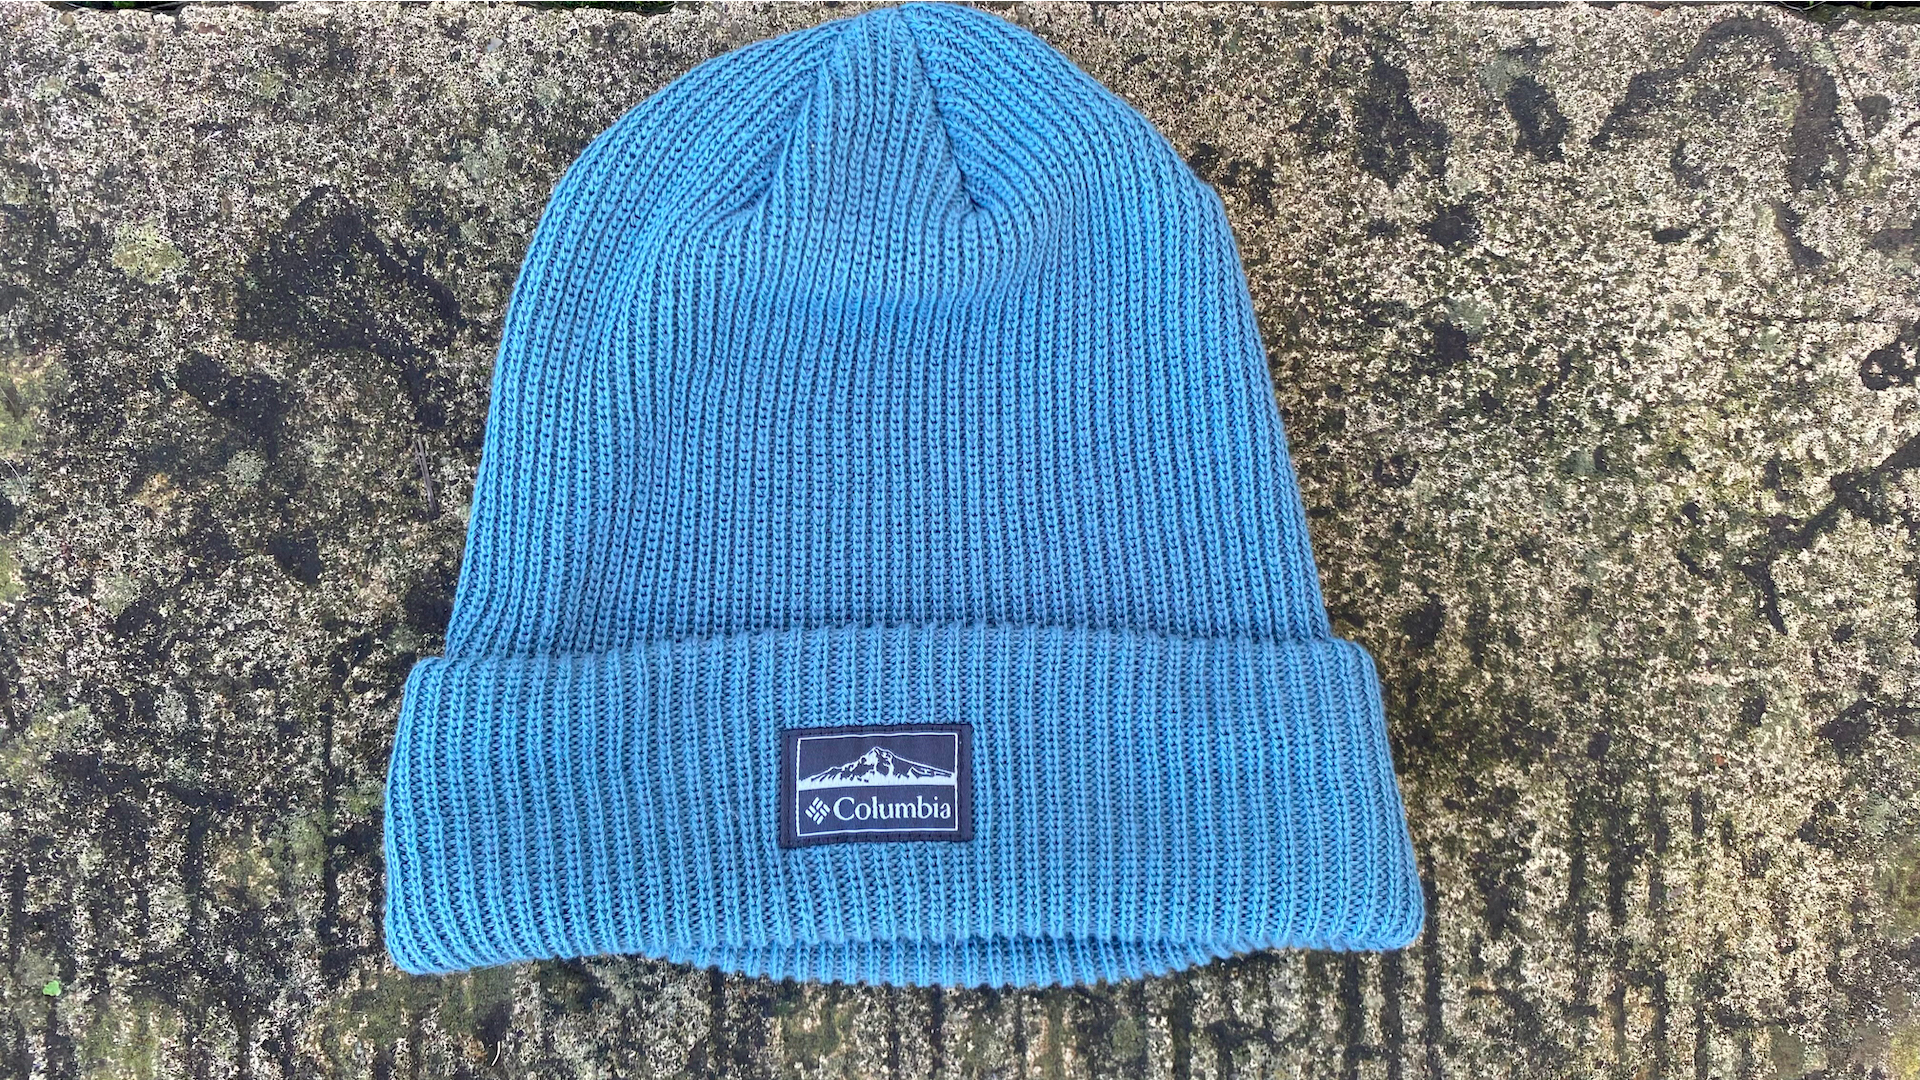 Beanie a chunky, Columbia Lager II cozy… Lost review: